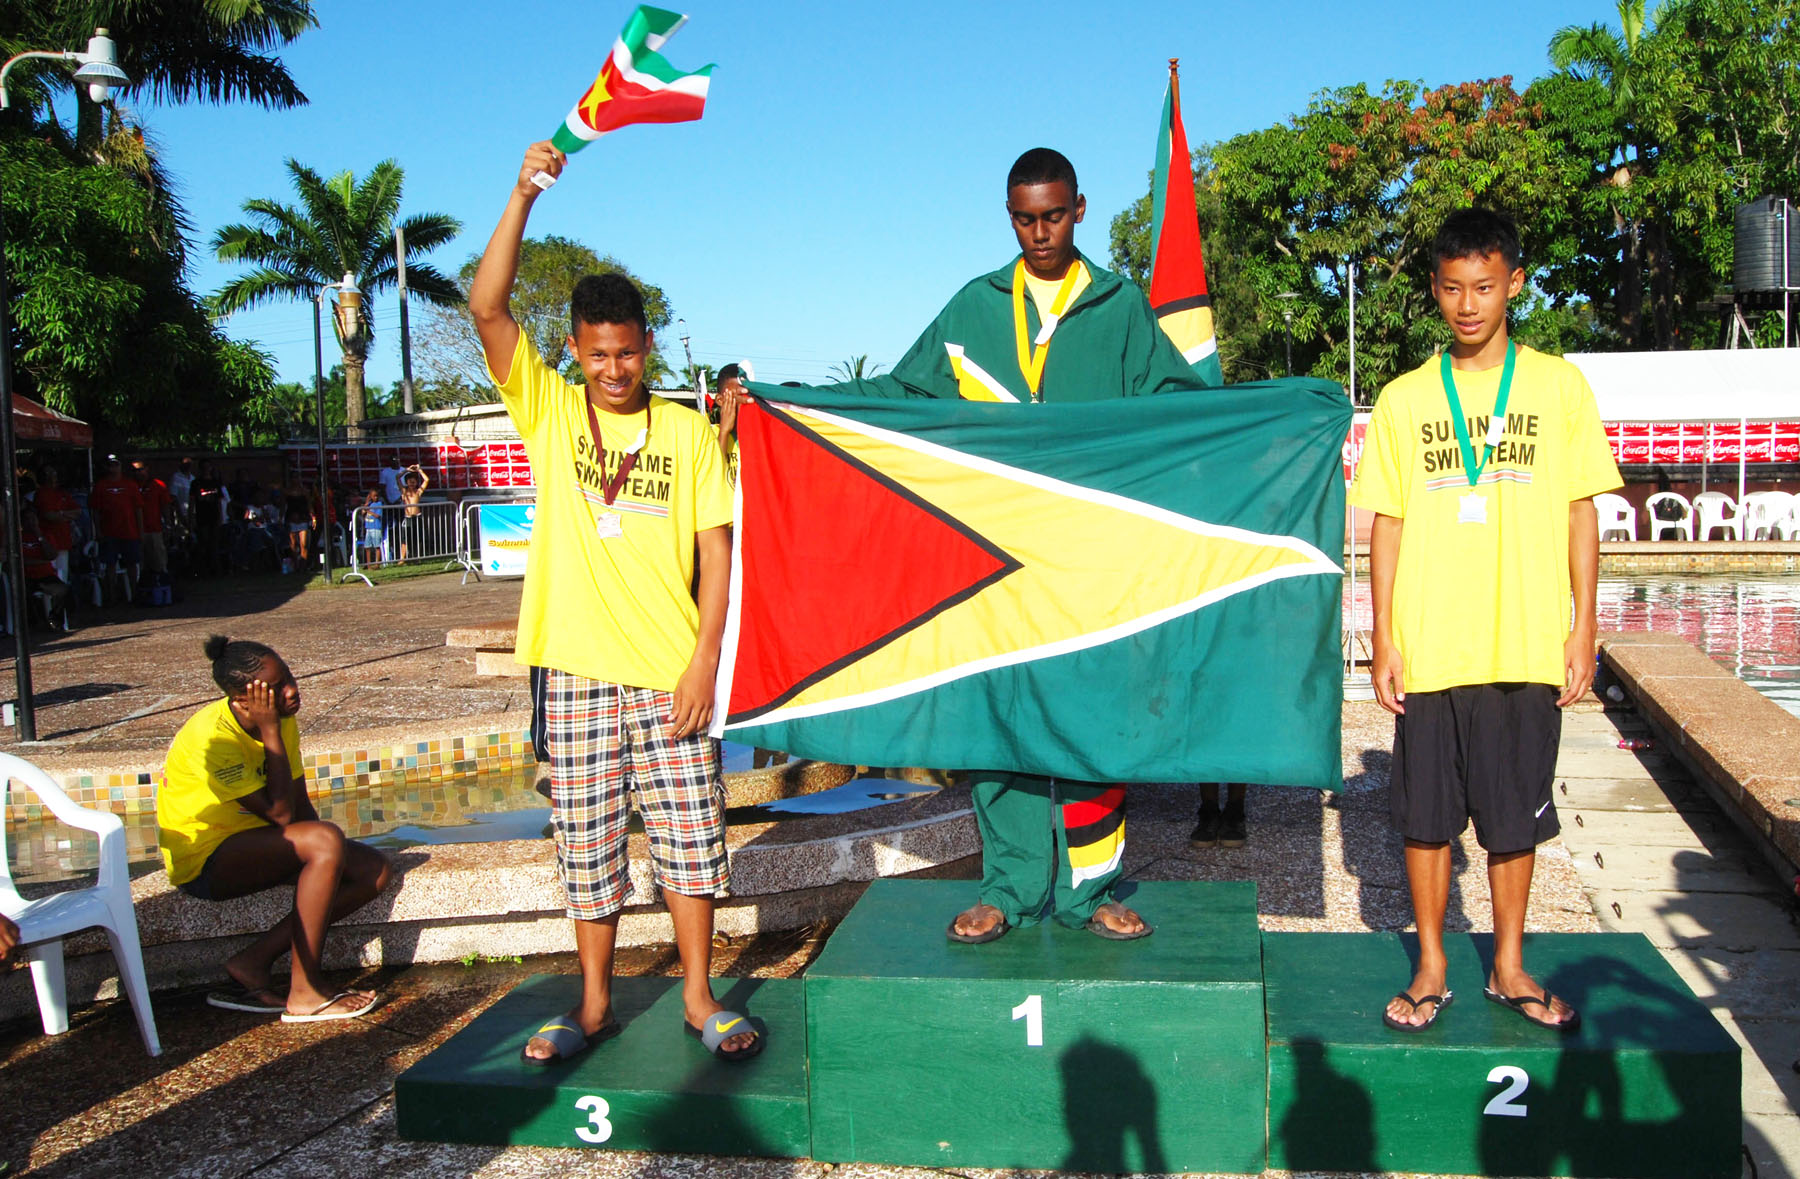 GOLDEN BOY! Guyana’s Linden Wickham (center) came up short at Carifta this year but did not disappoint at home in this year’s Goodwill Championships. Wickham emerged as the only male gold medalist after wining the 50m freestyle event ahead of Suriname’s Bjorn Lie Kwie (right) and Kevin Panoet . (Lawrence Fanfair photograph)  